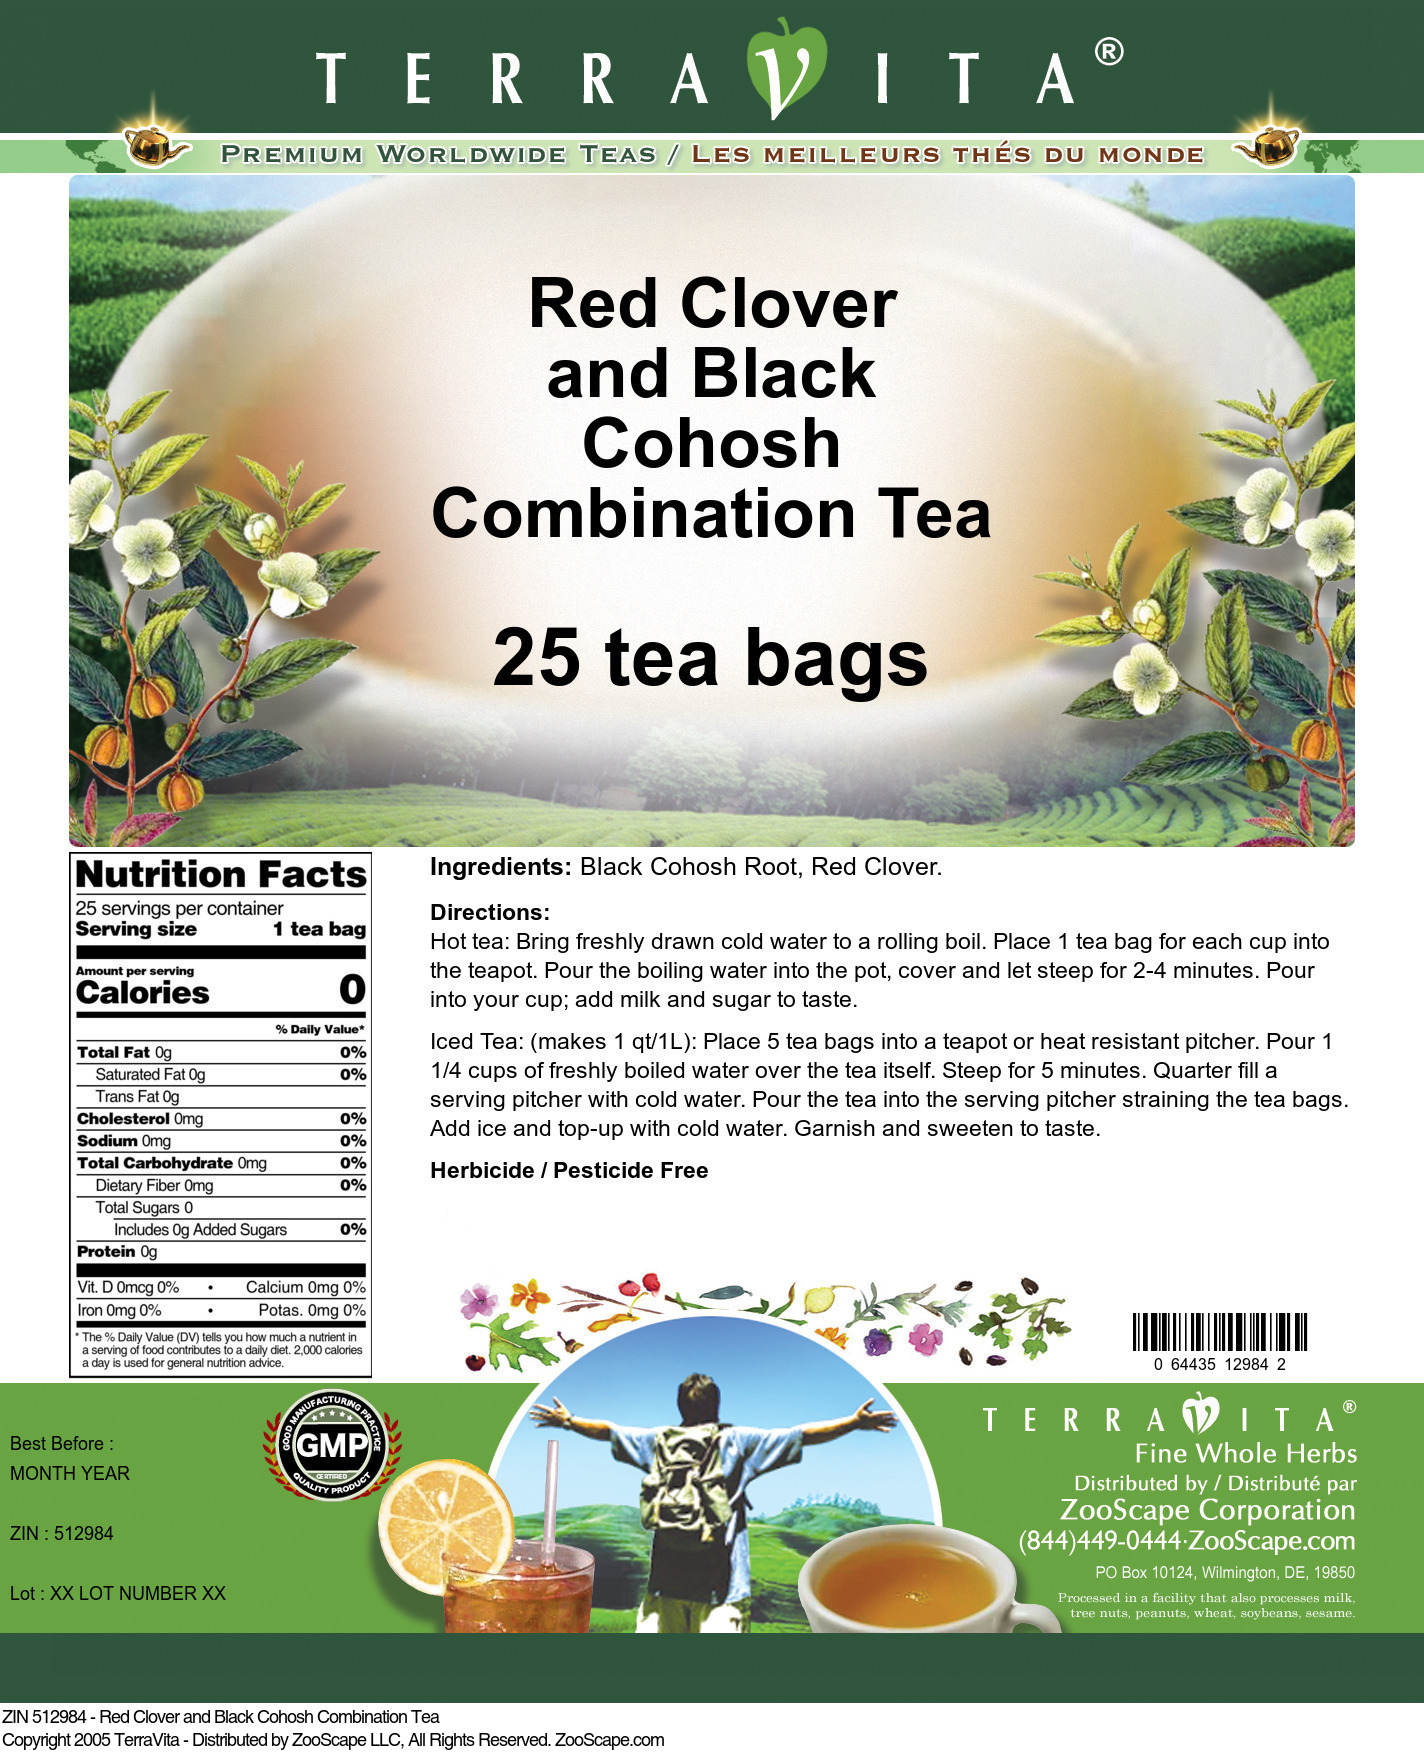 Red Clover and Black Cohosh Combination Tea - Label